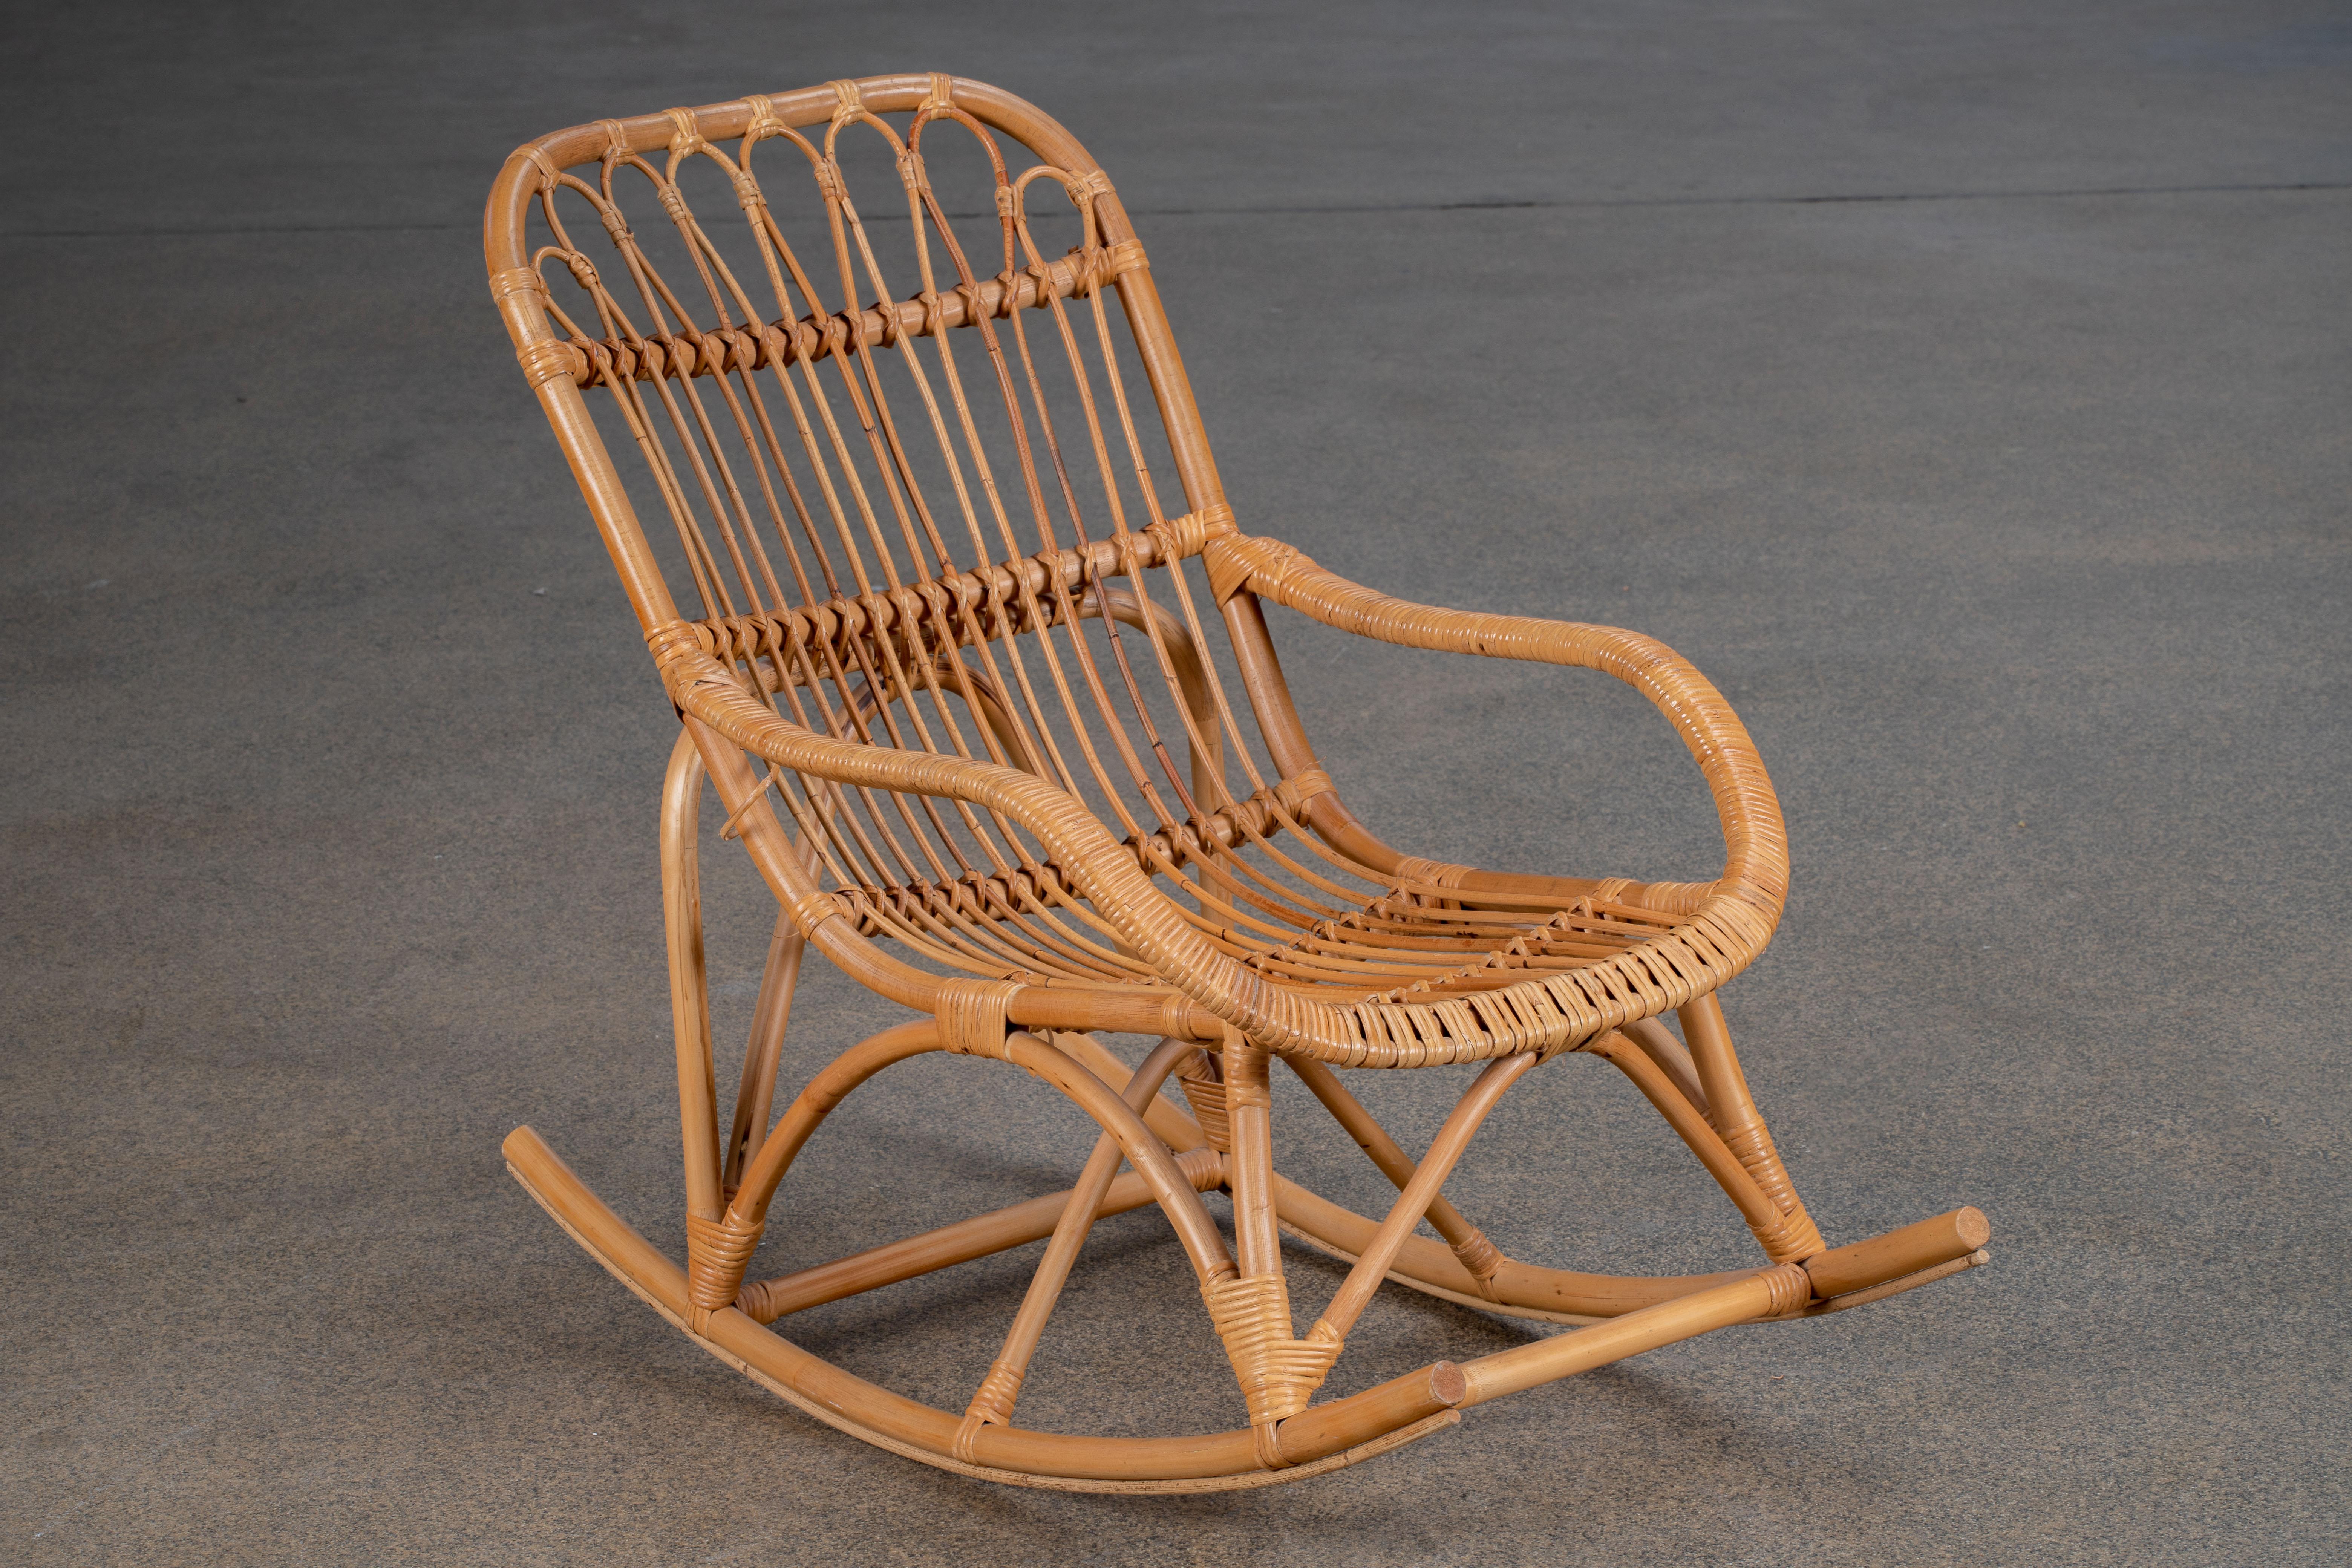 1960s oversized bamboo rattan Rocking chairs Handmade in the French Riviera organic modern style. The chairs feature a large bent rattan frame. Very comfortable with excellent joinery and craftsmanship. Could also be used as patio garden